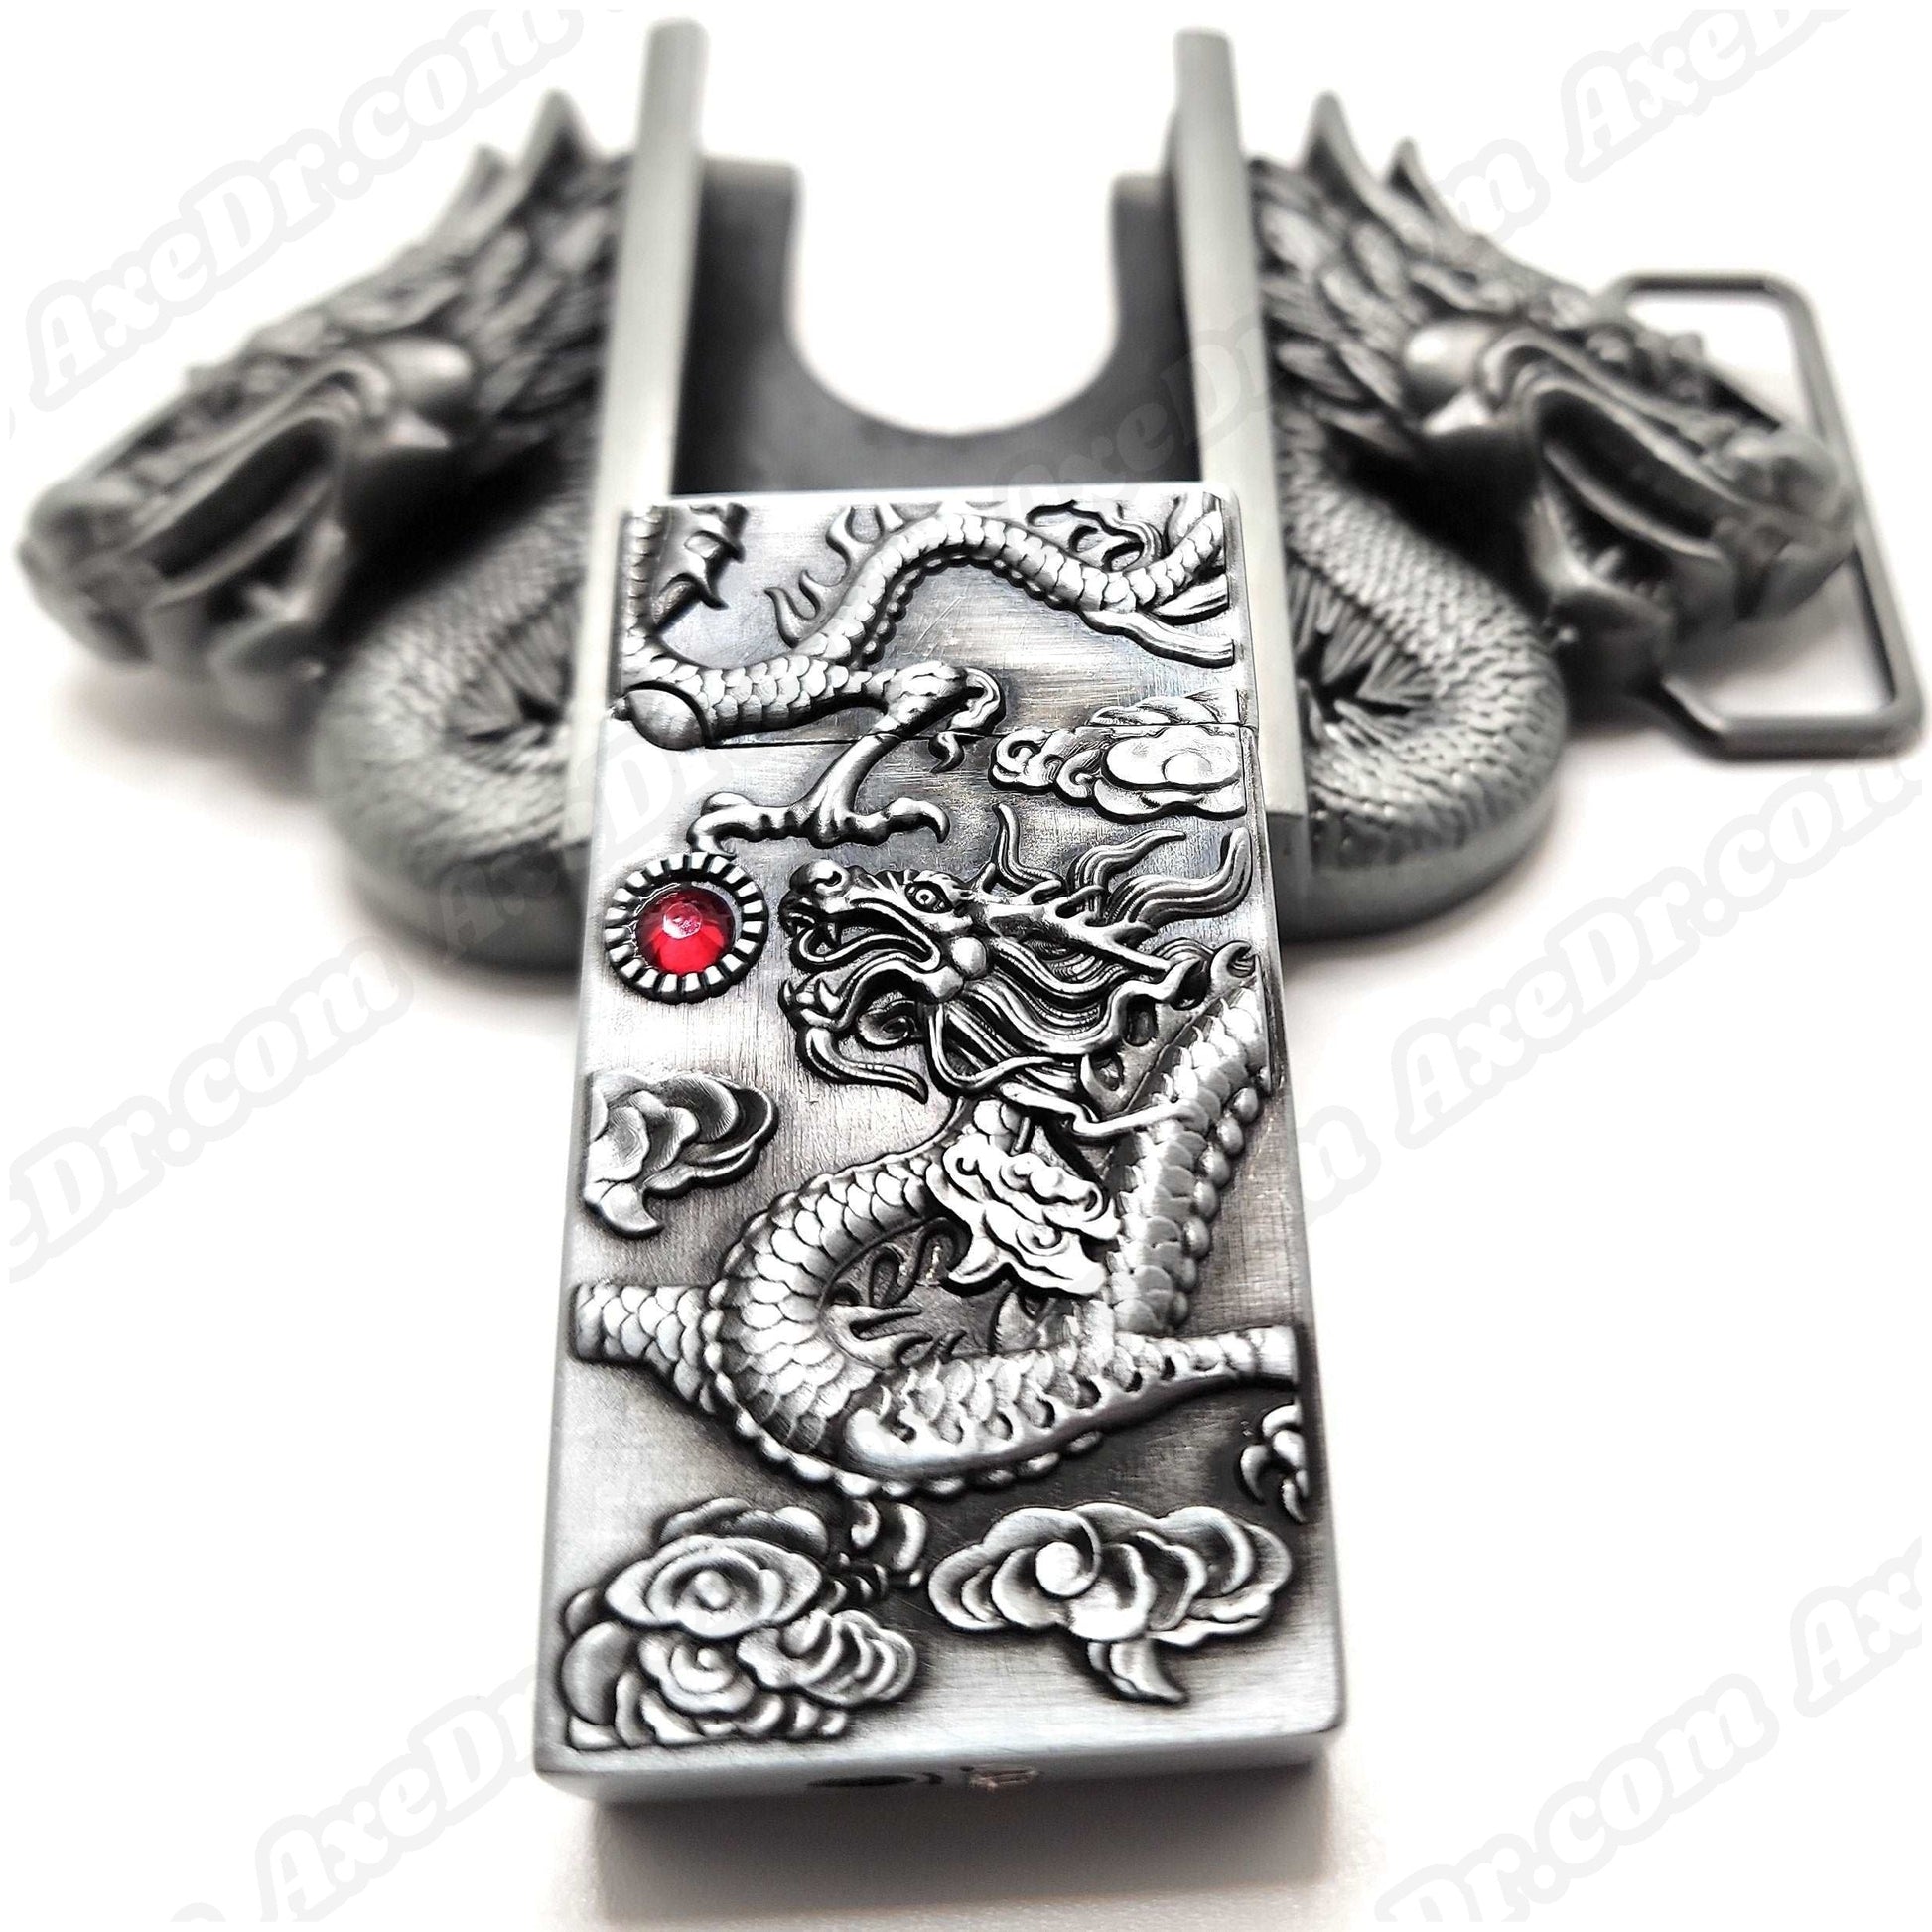 Dual Dragons Silver Lighter Belt Buckle and Genuine Leather Belt shop.AxeDr.com Buckles with Belt, Genuine Leather